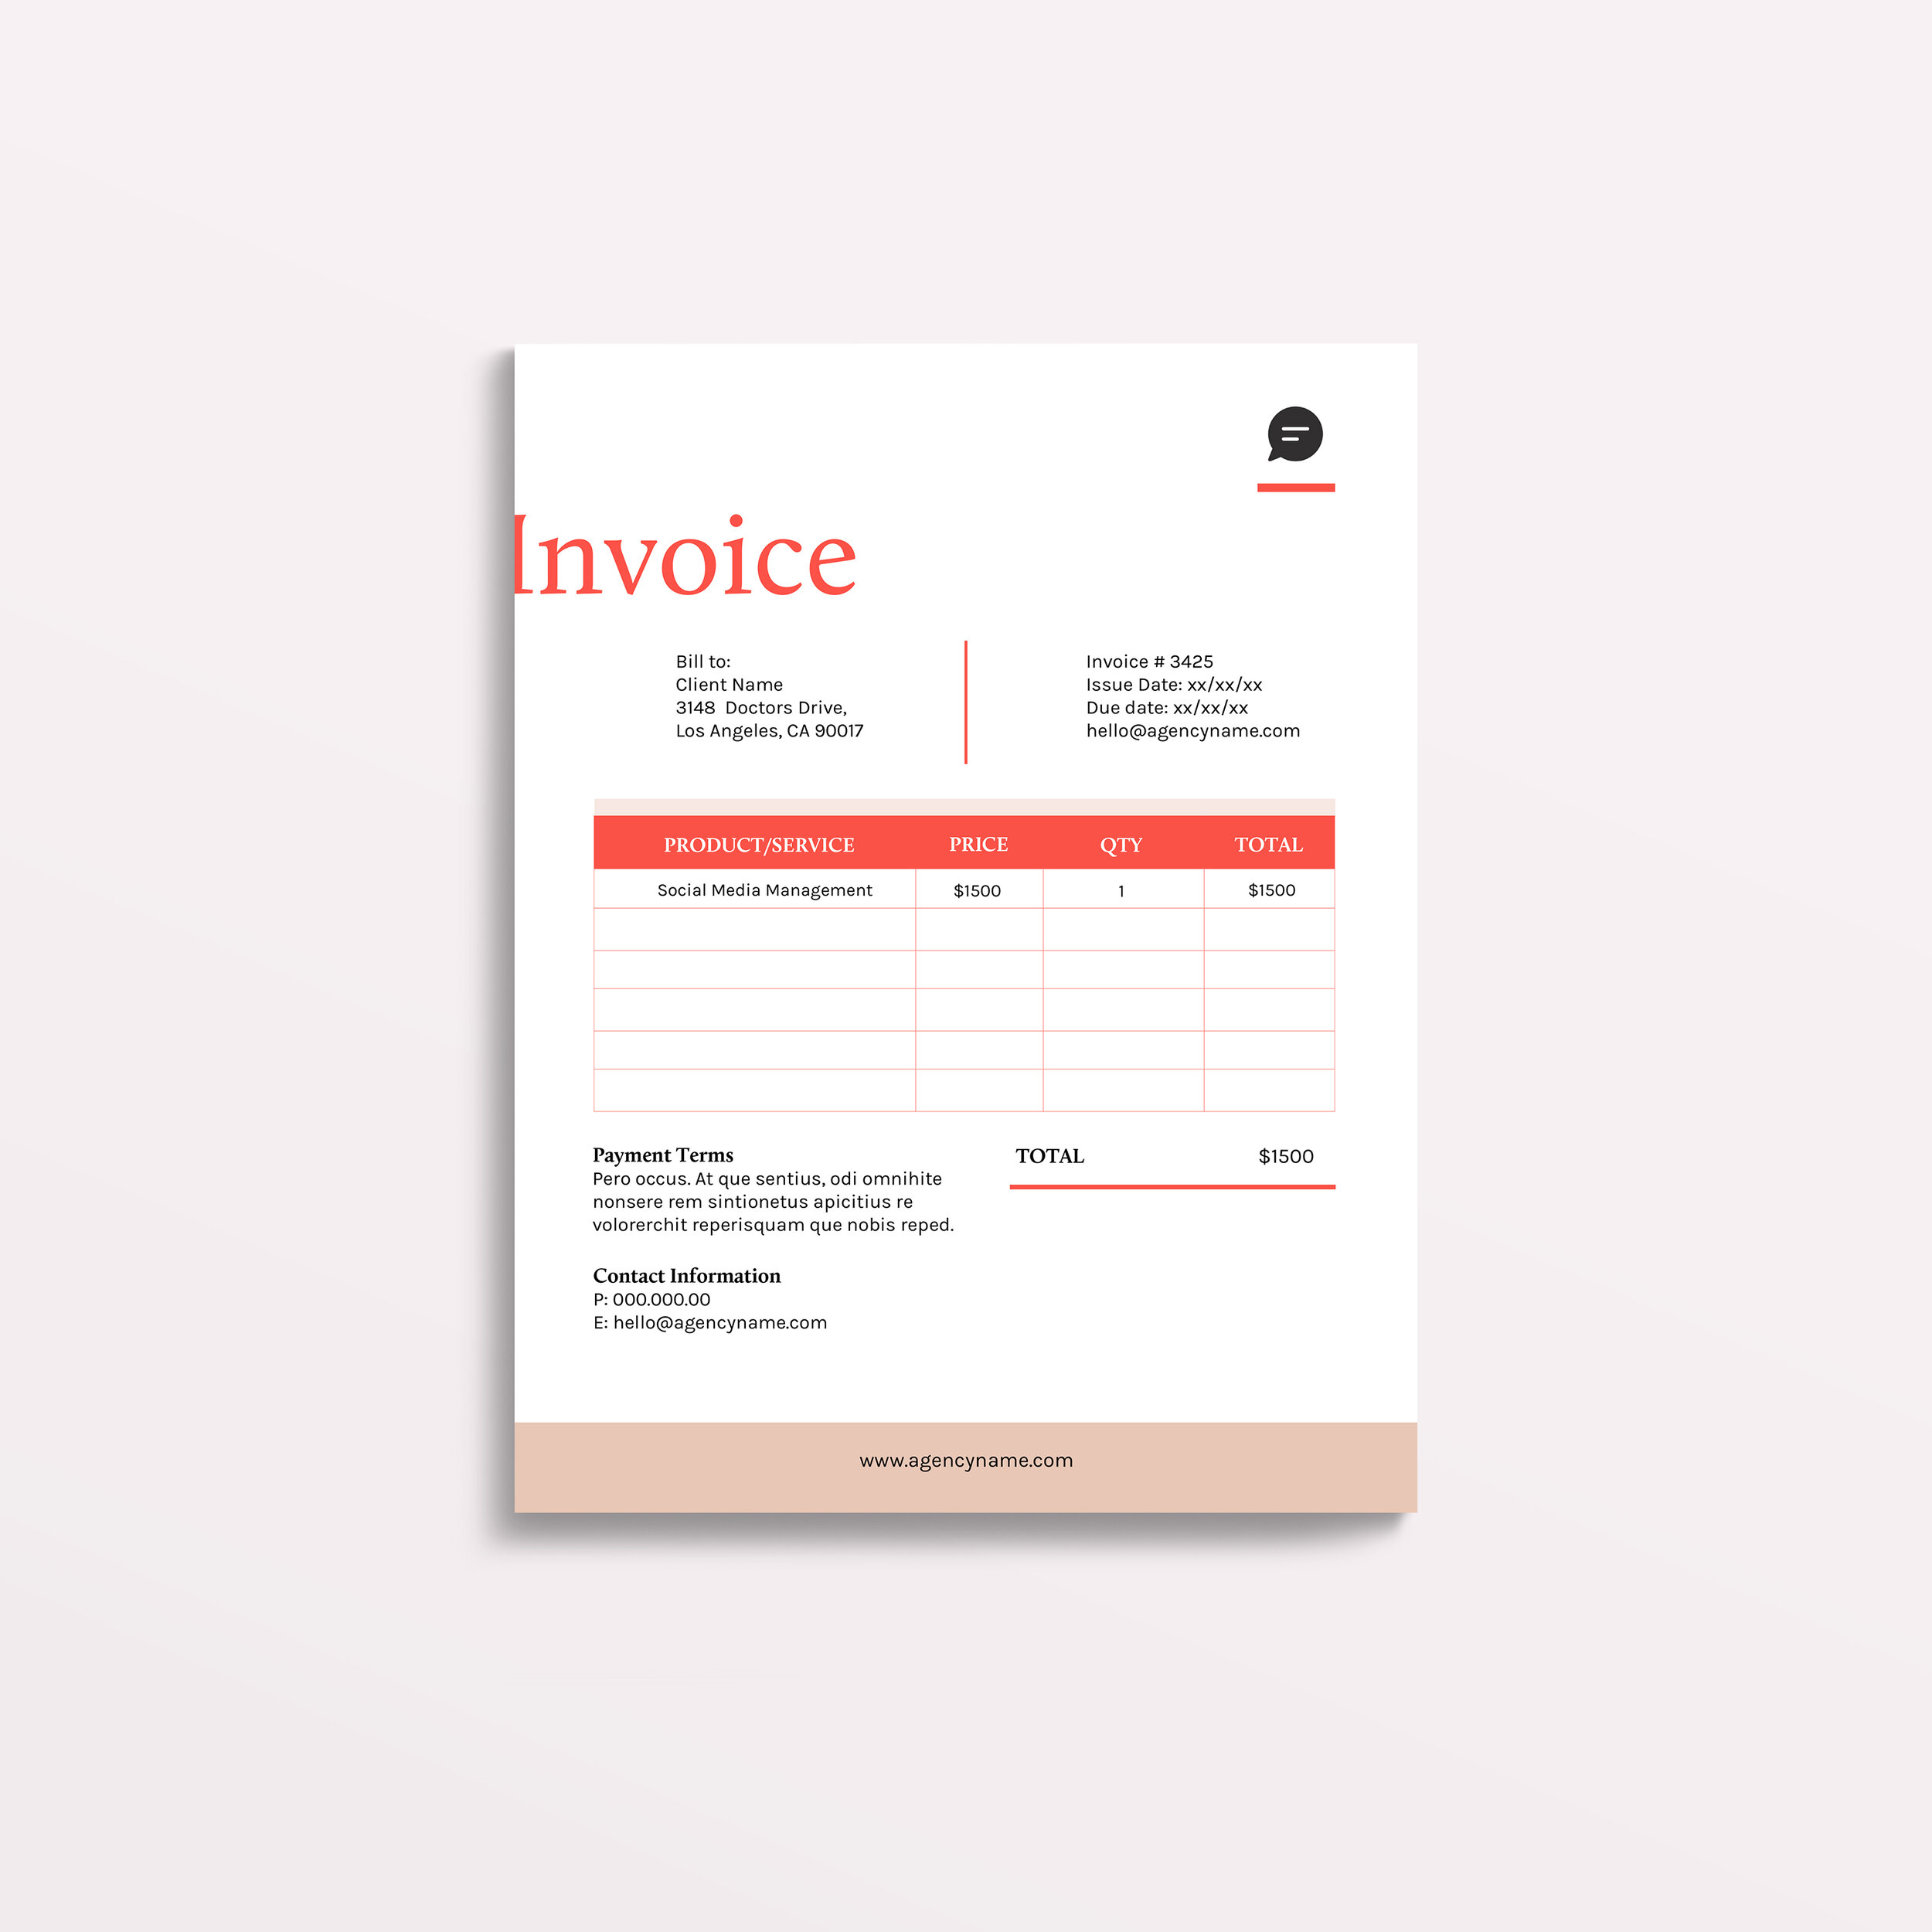 Download Invoice Template Jpg Pictures